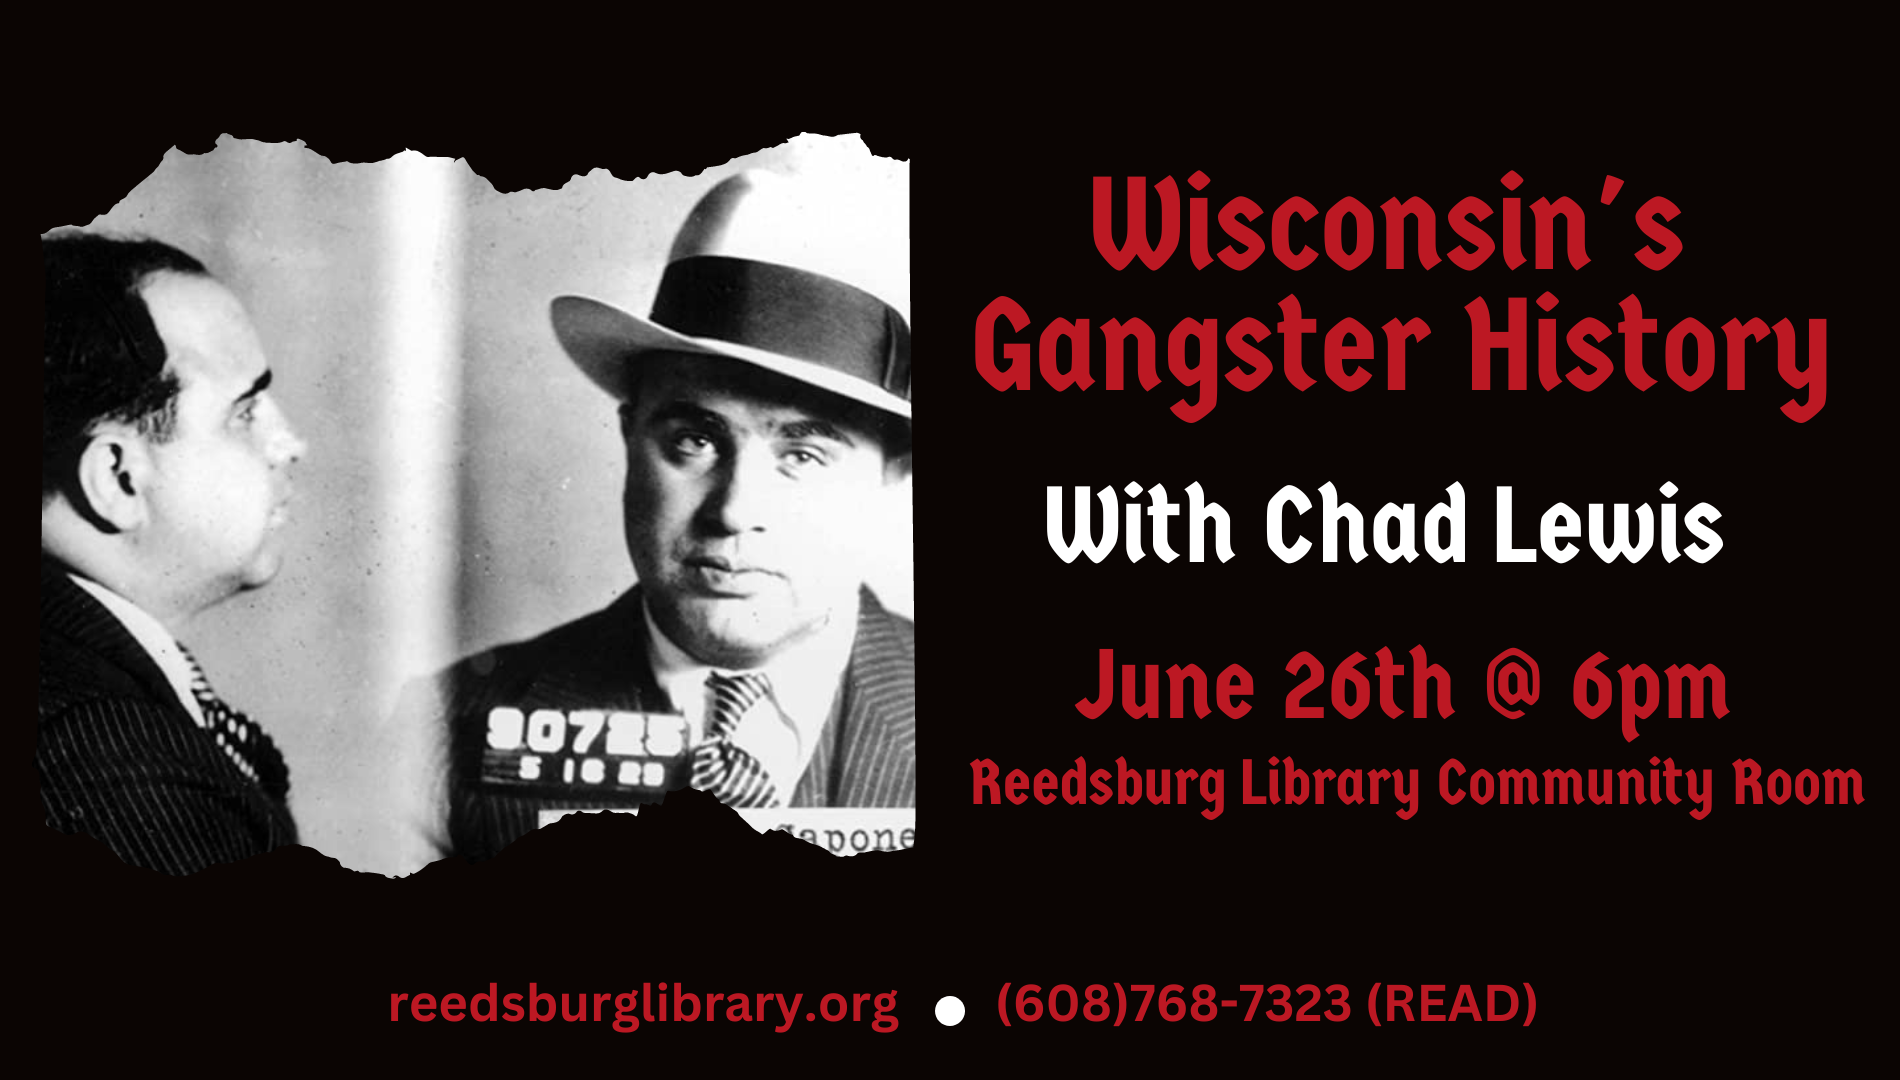 Wisconsin's Gagnster History with Chad Lewis. June 26th at 6pm.